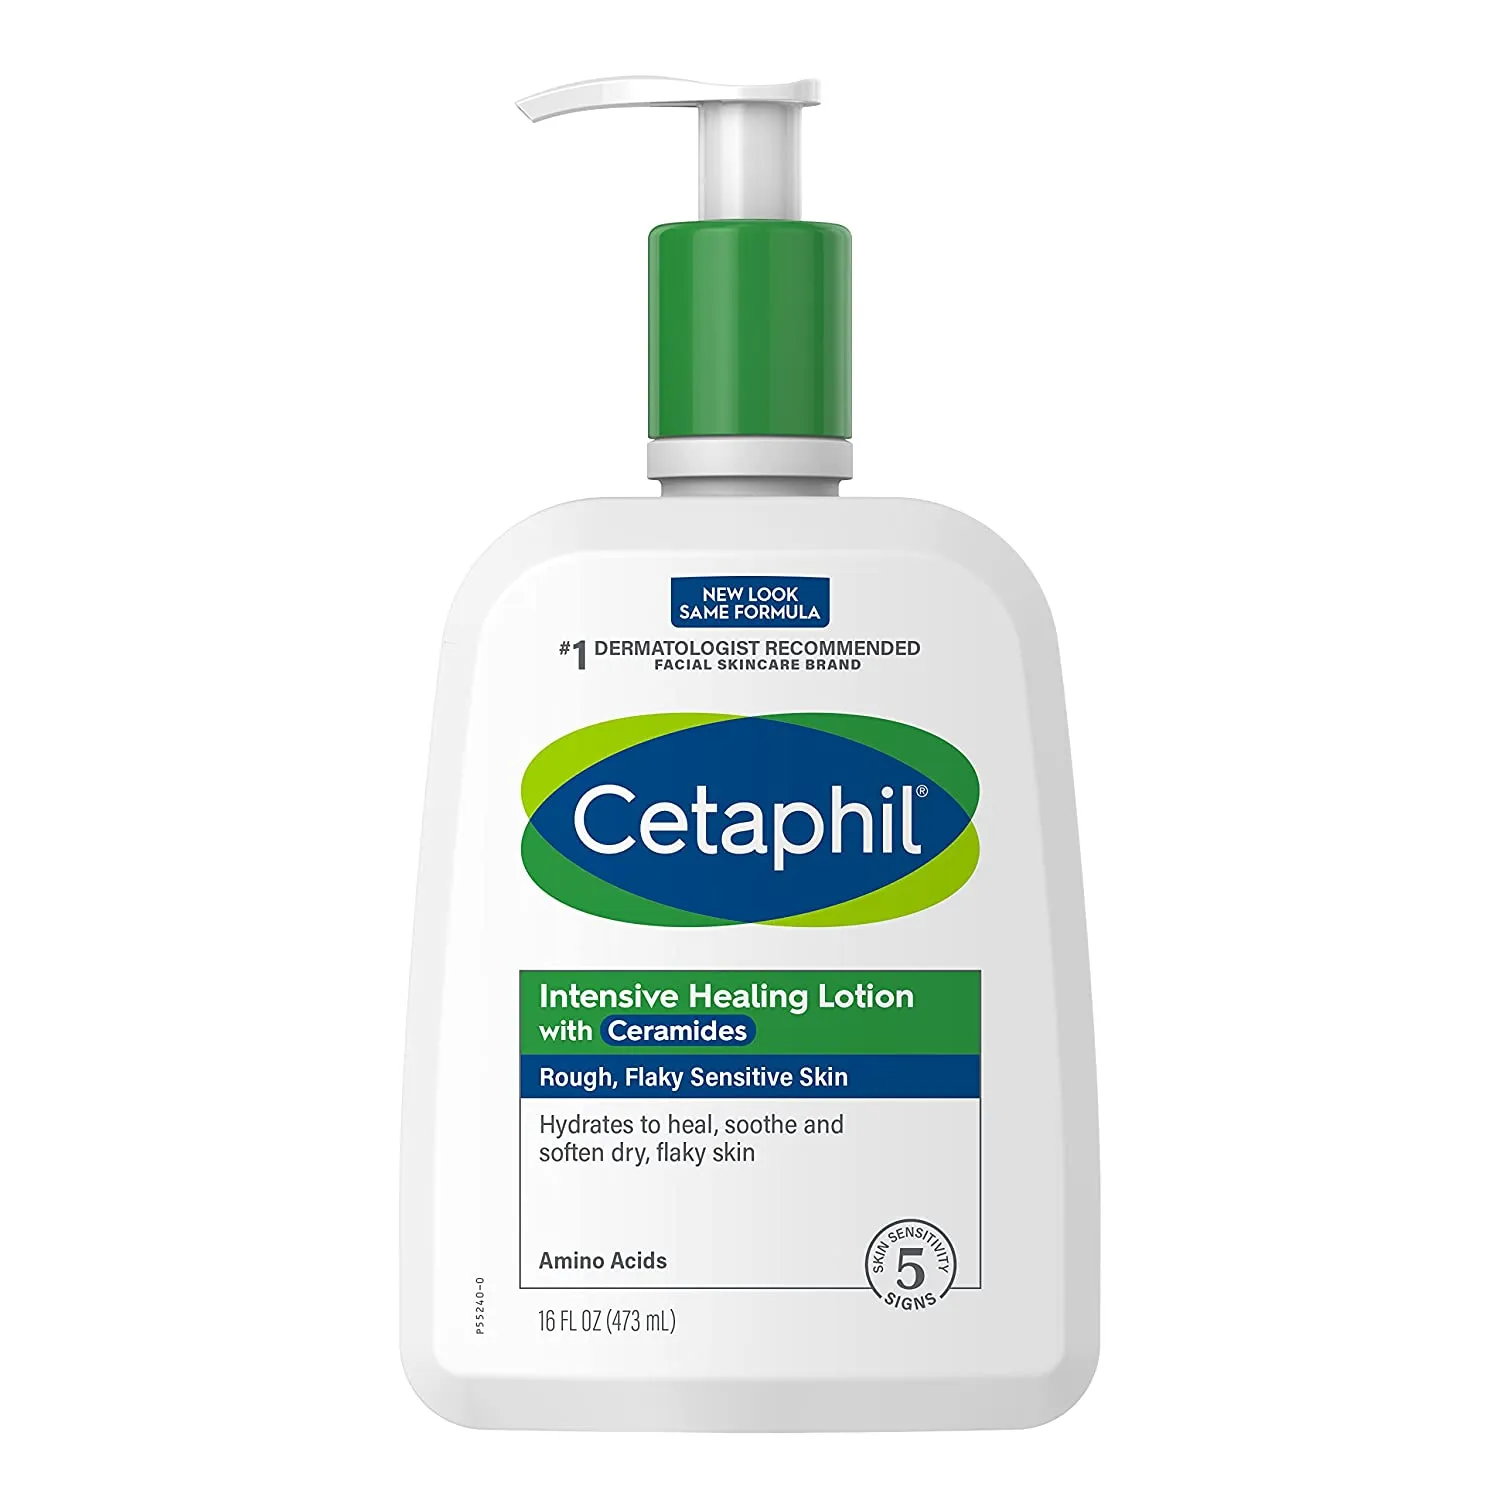 A close second in the Cetaphil vs Eucerin comparison, the Intensive Healing Lotion by Cetaphil